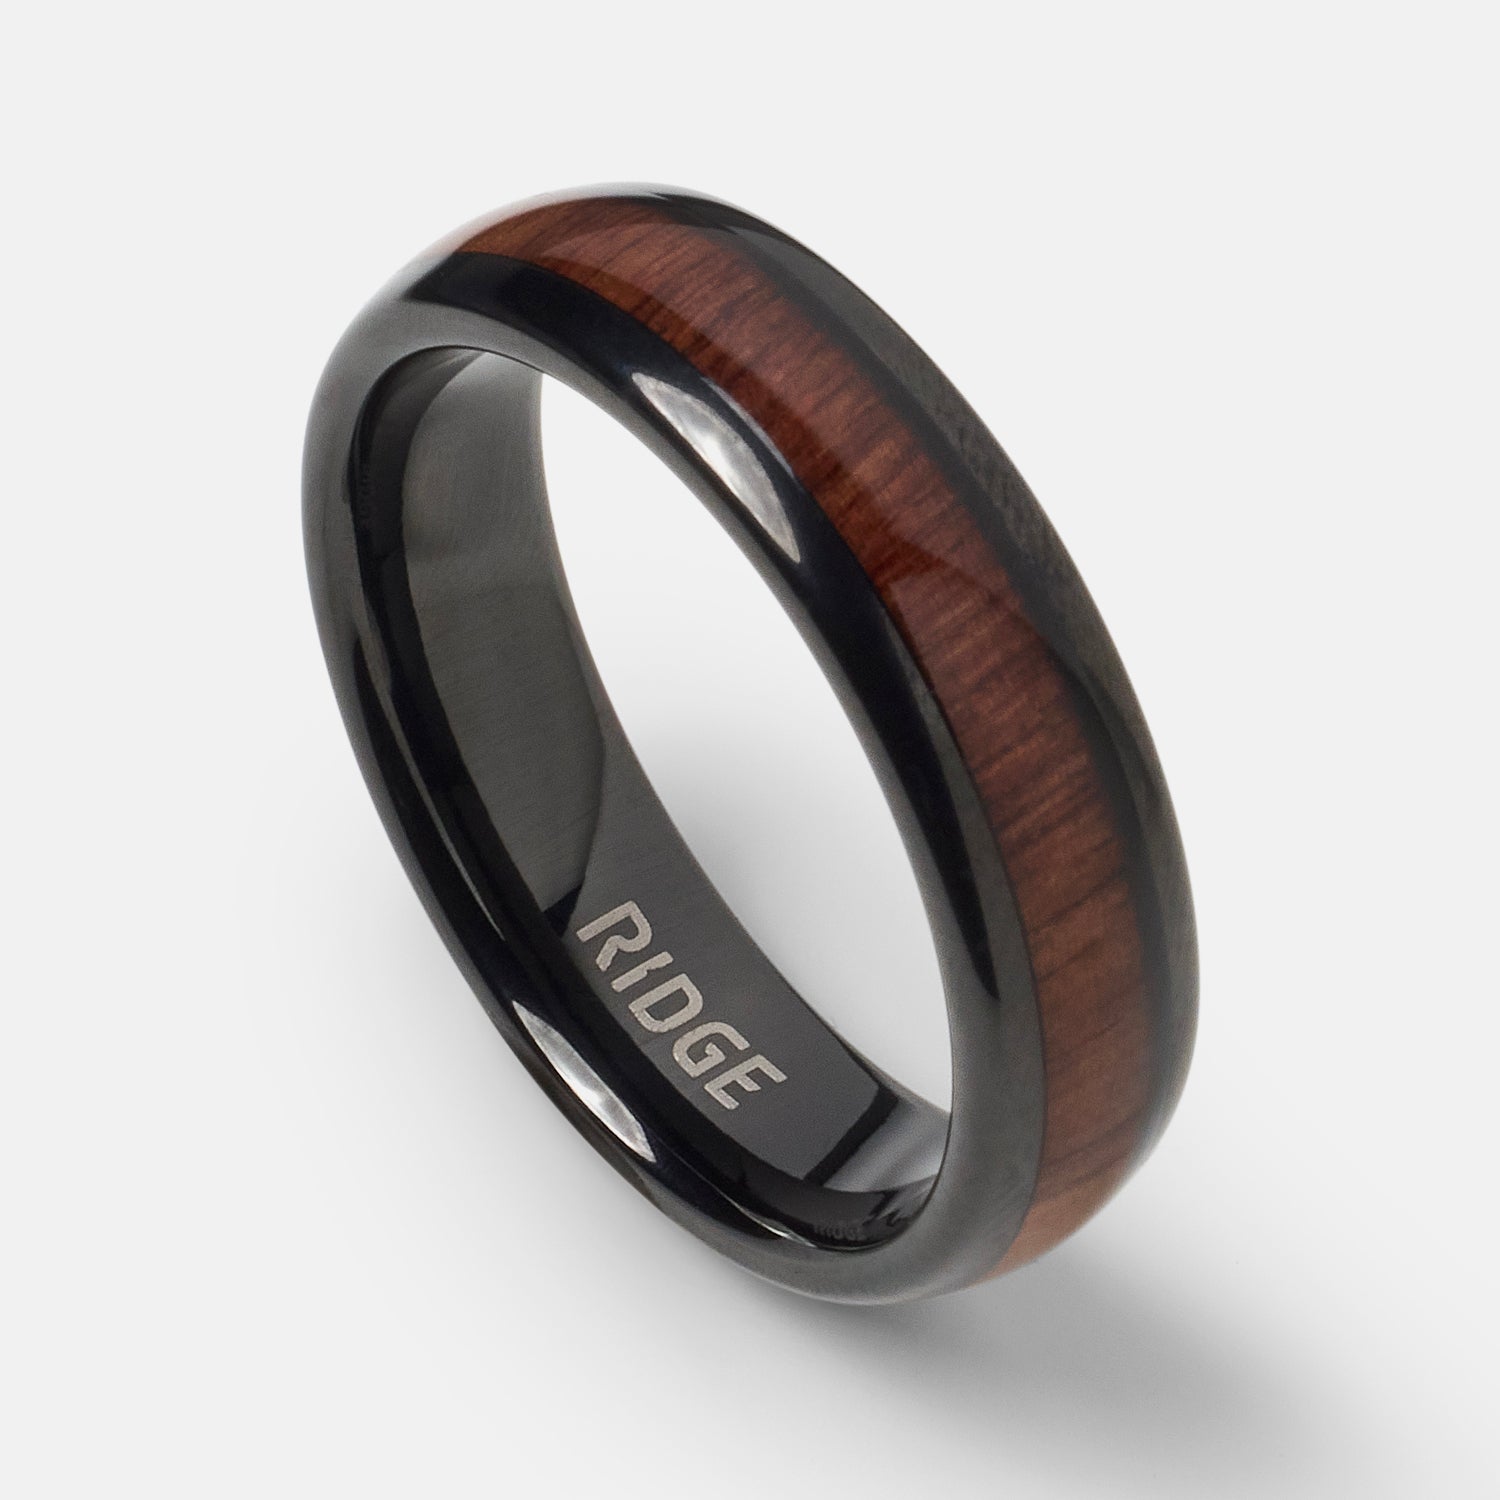  Mozzin Wood Rings Wooden Band For Men and Women, 8mm Natural  Hardwood Ring, Comfort Fit, Cross Motif Inlaid : Handmade Products